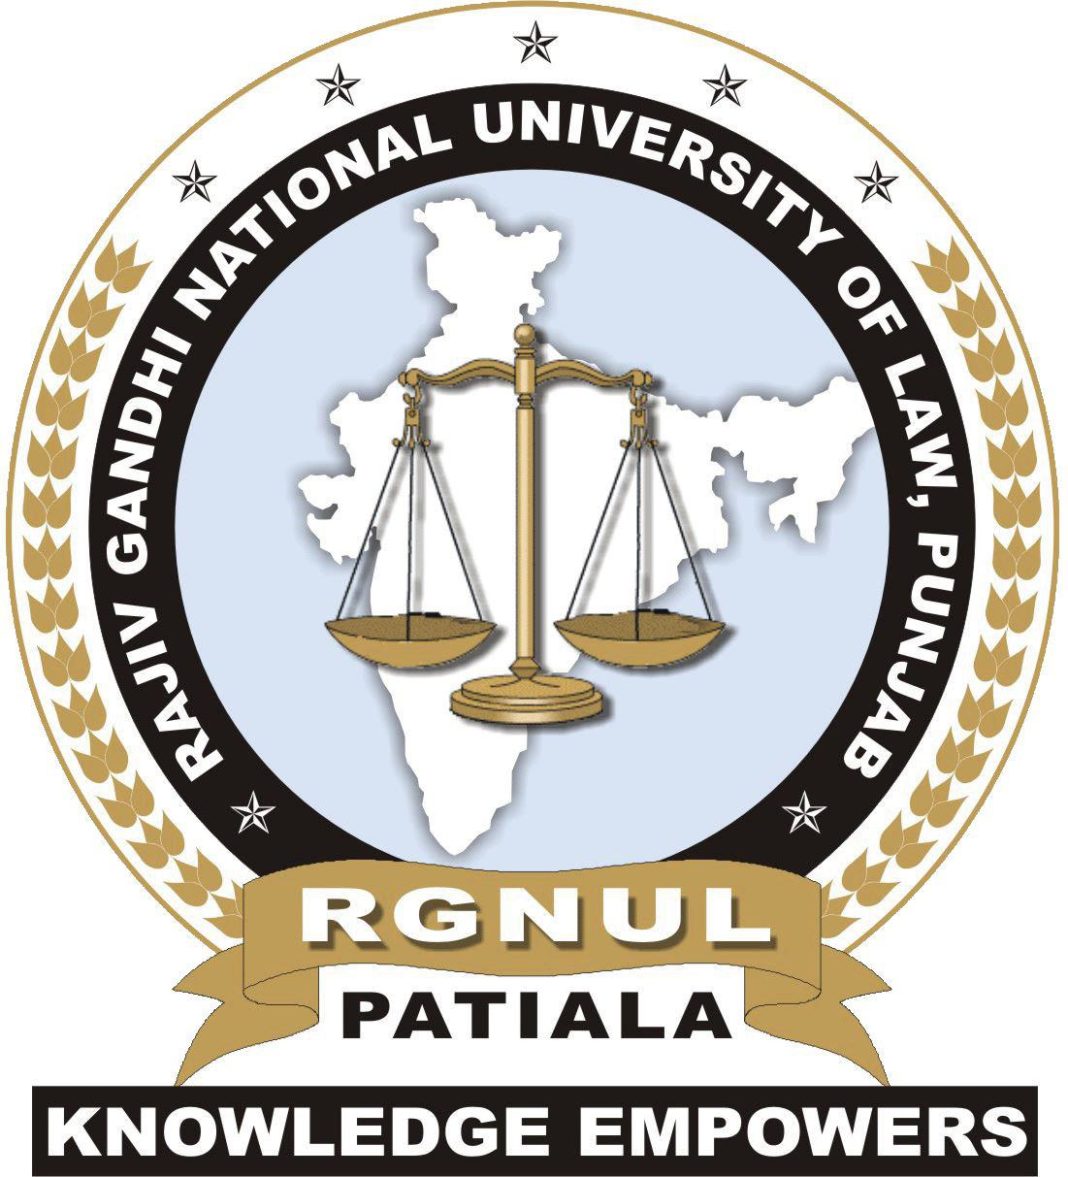 National Conference on Insolvency and Bankruptcy Code: Implementation, Efficacy and Impact, by RGNUL, Punjab